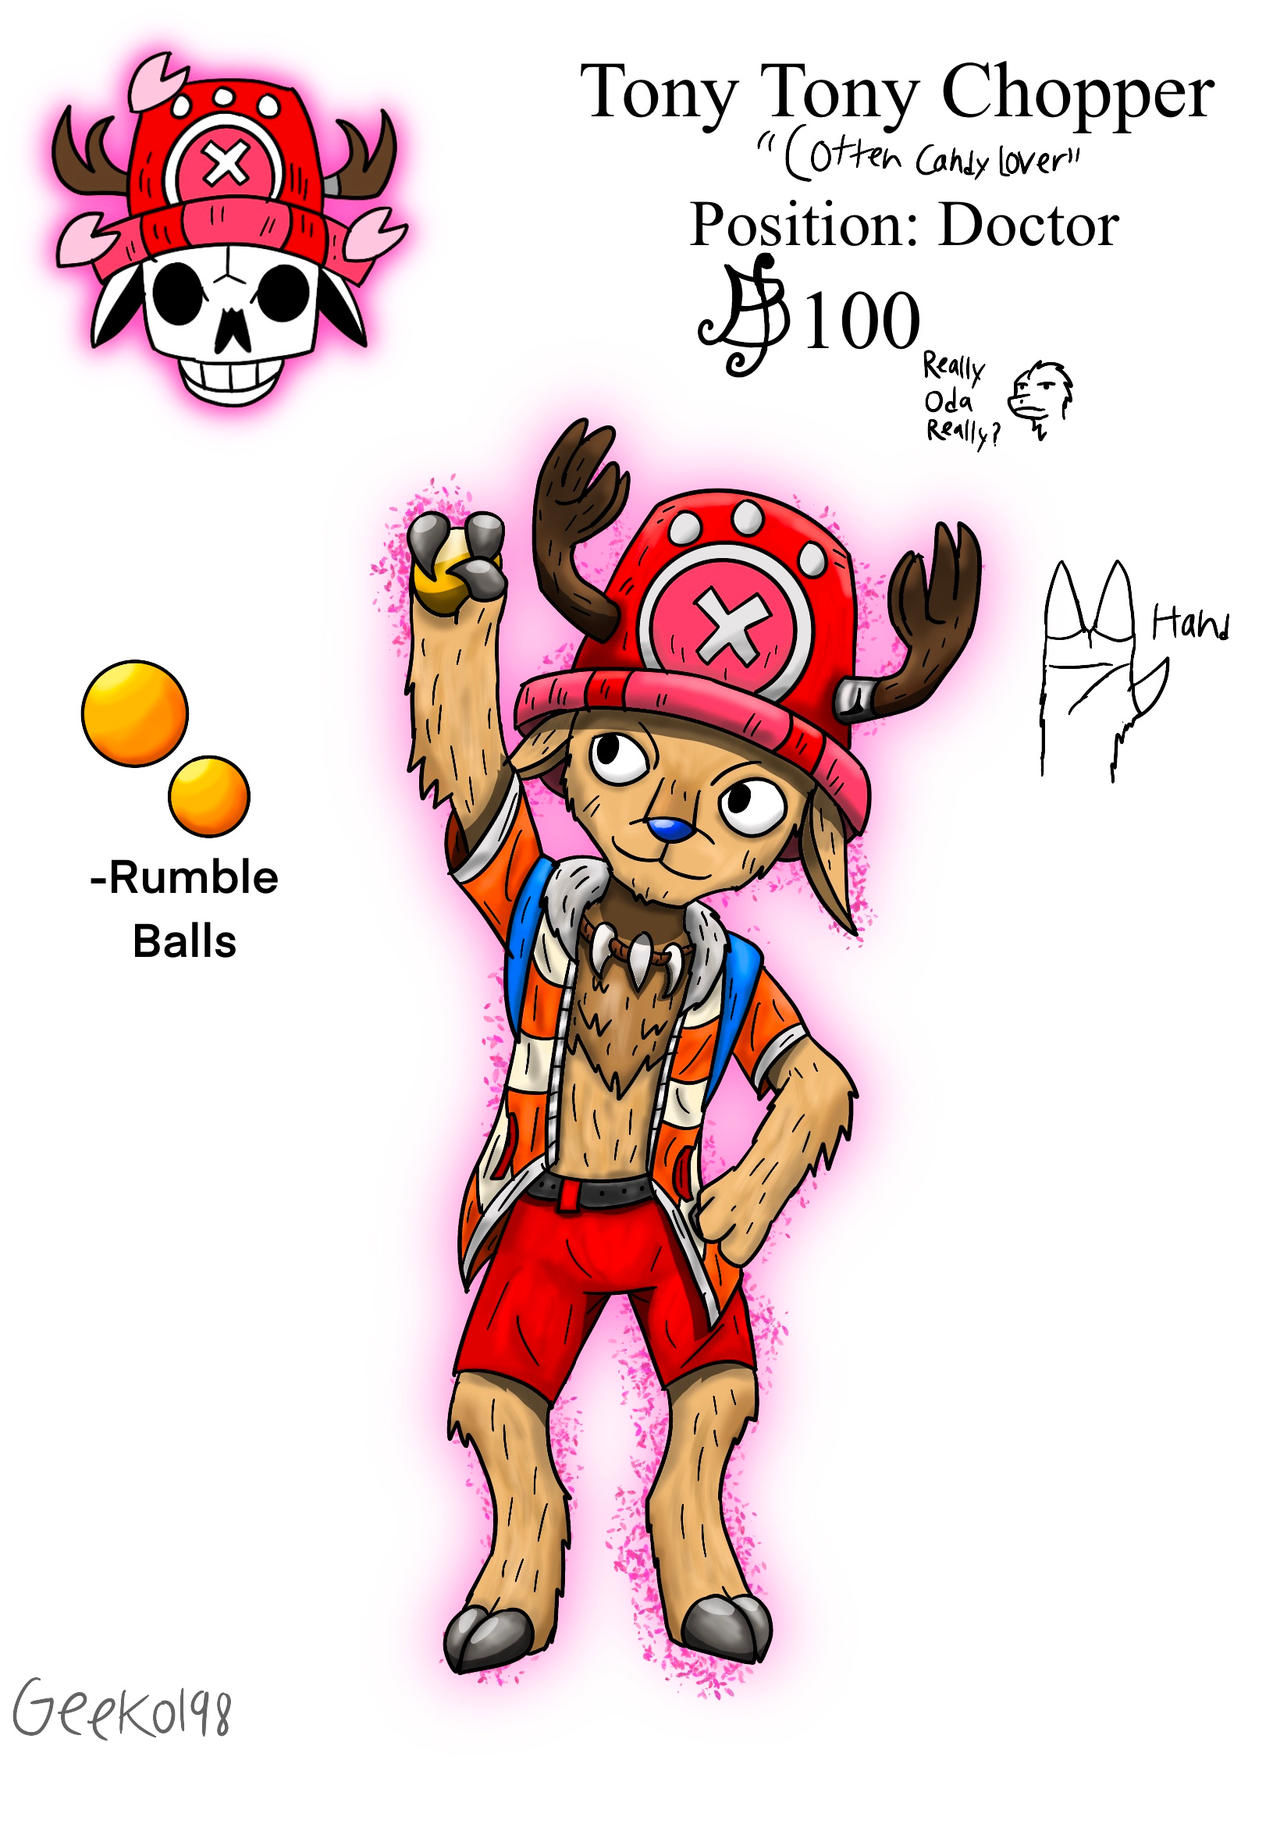 What Happened If New World Chopper Eats 3 Rumble Balls At The Same Time?